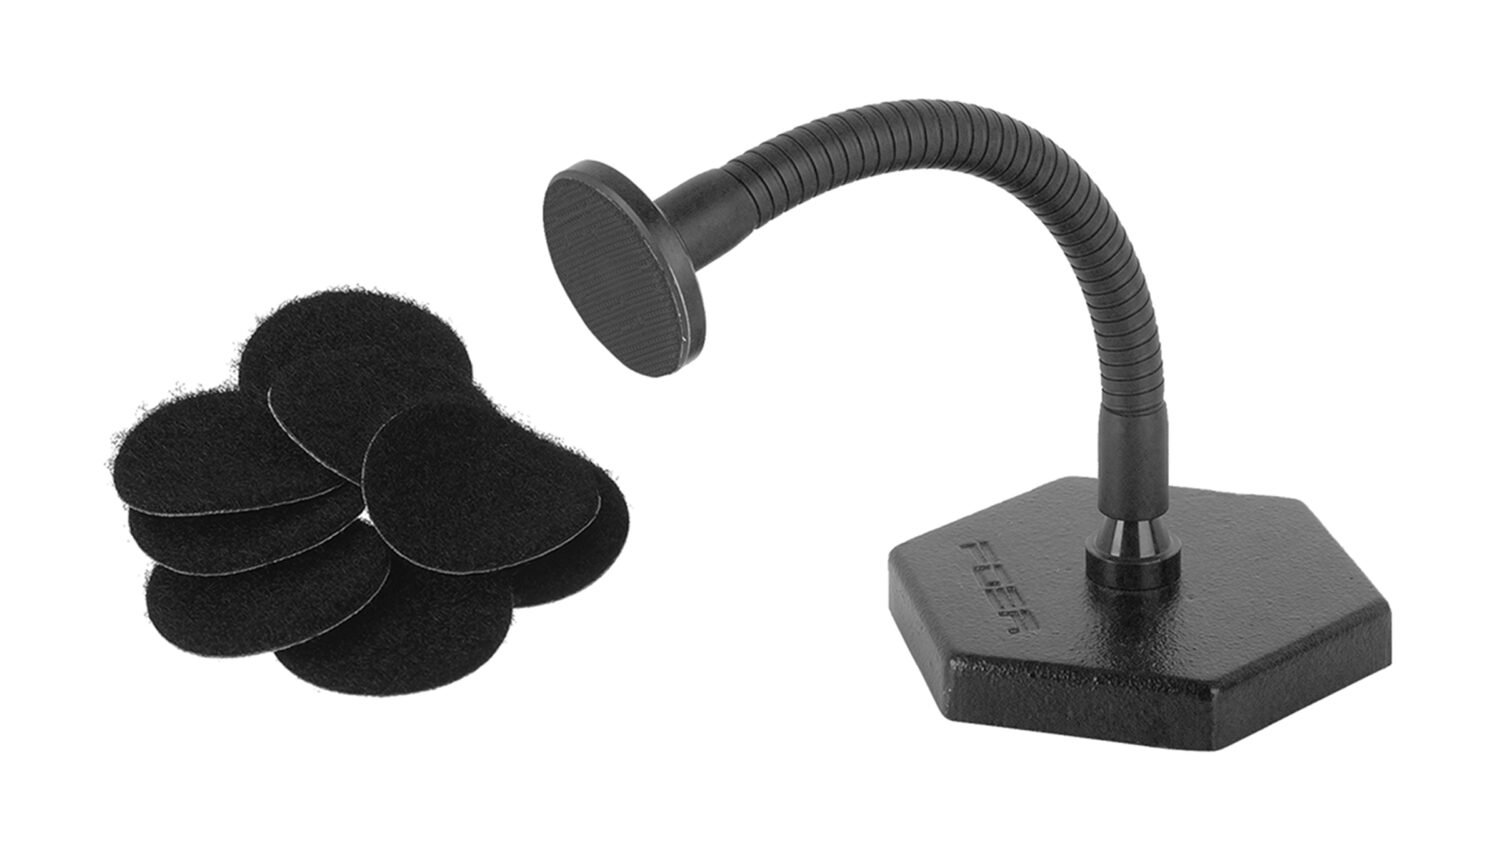 FOBA holder kit with touch fastener and gooseneck arm